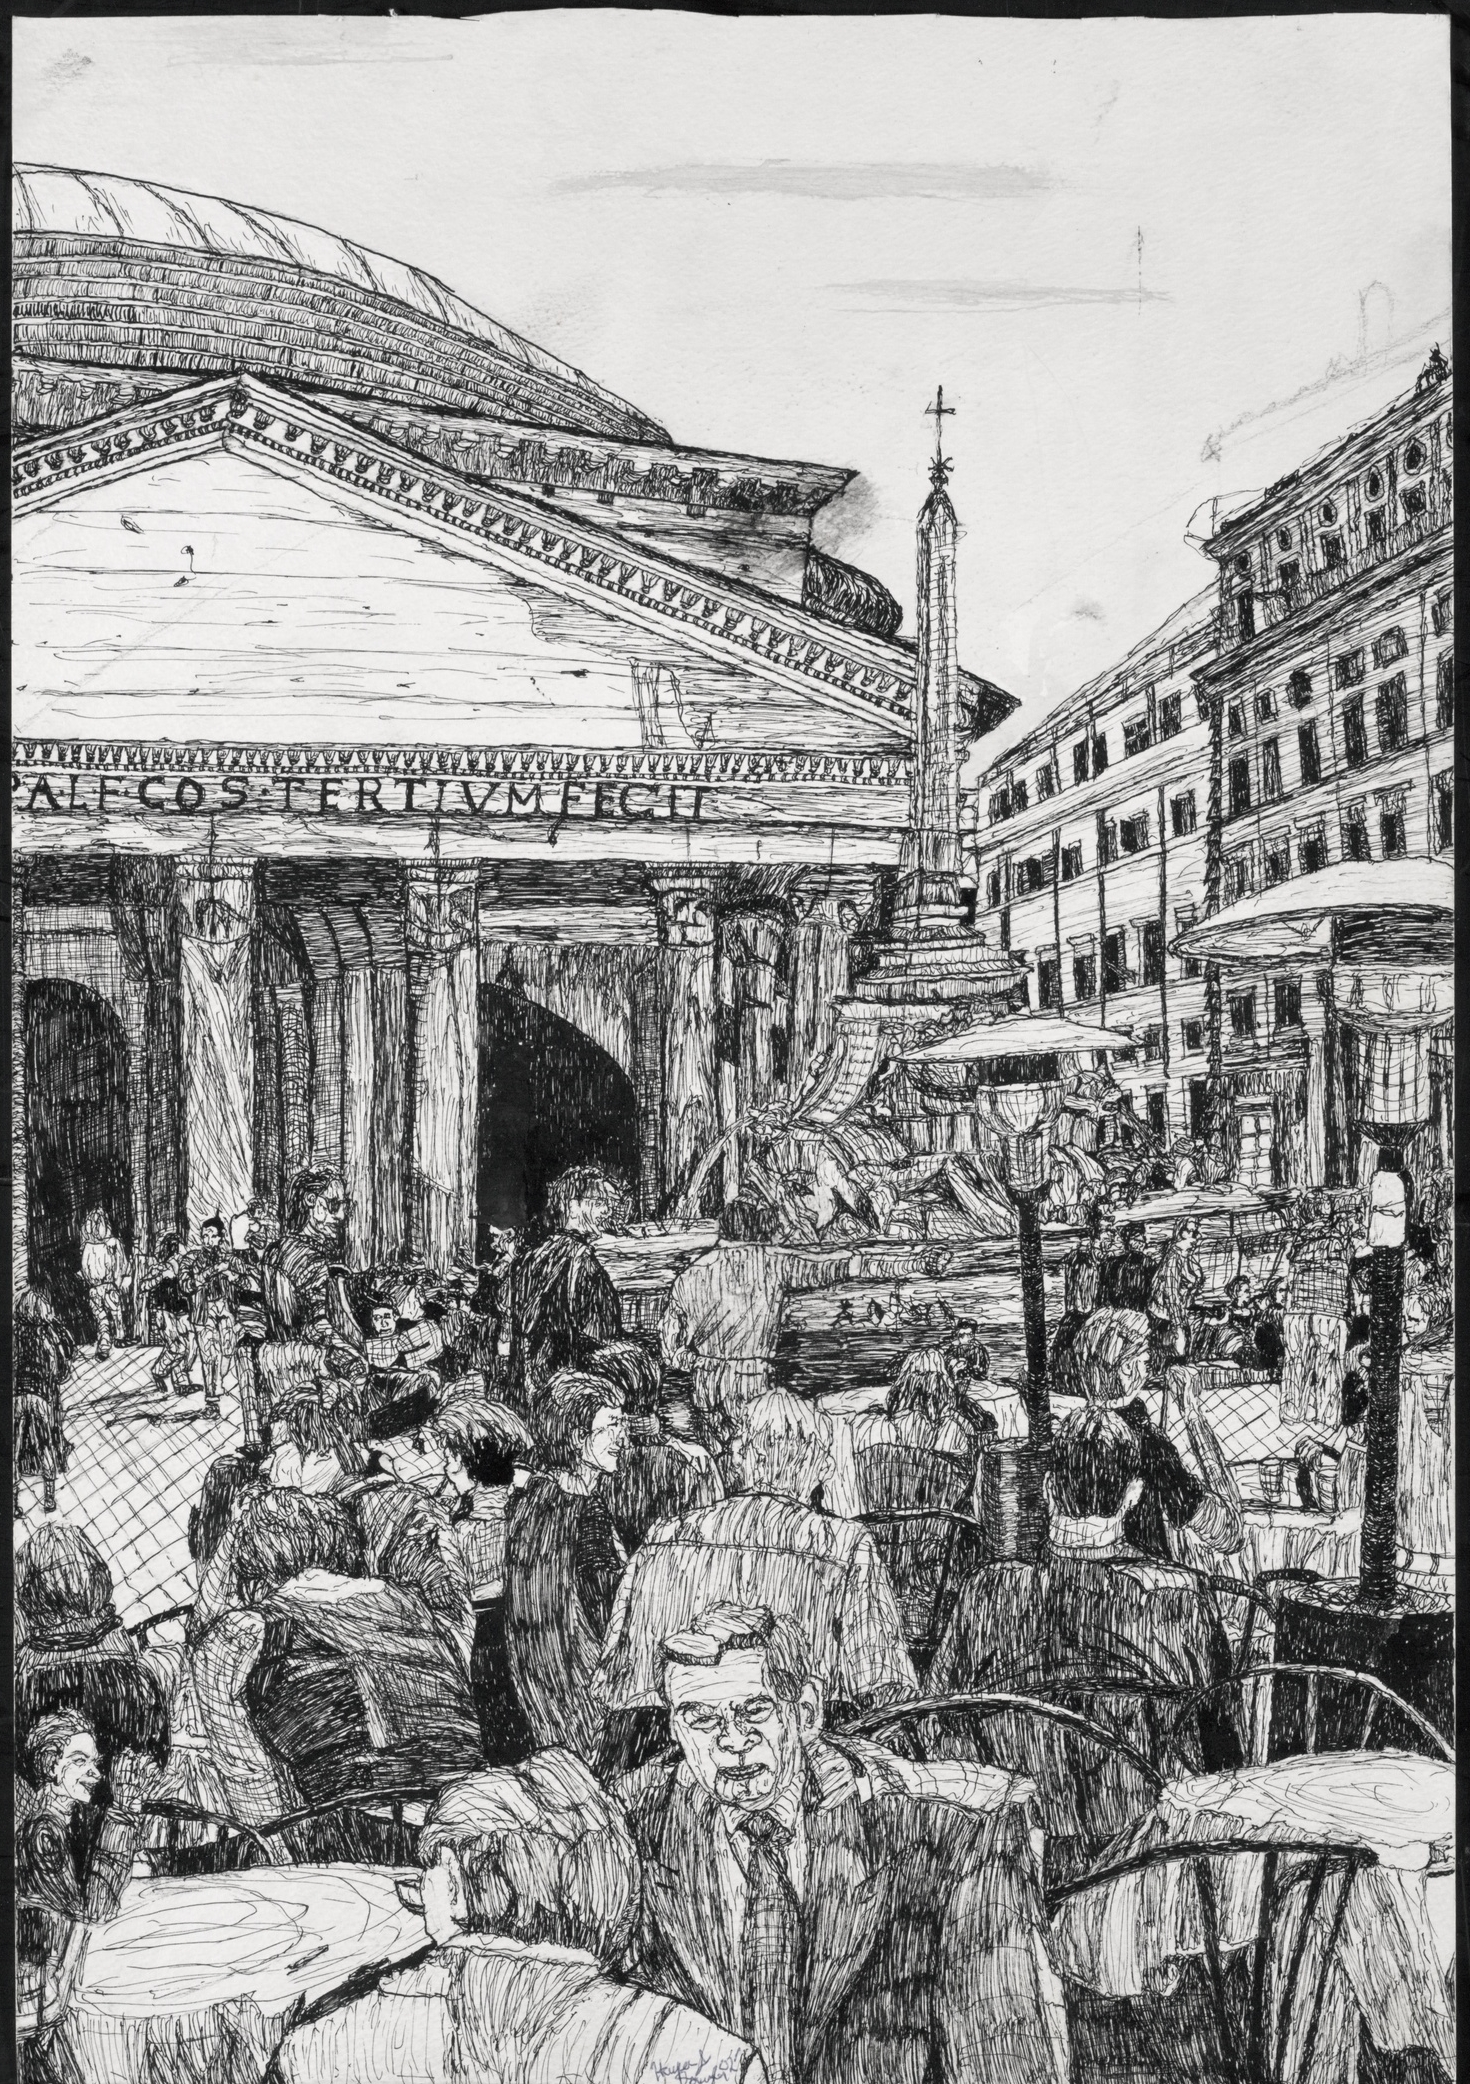 Café outside the Pantheon, 15” by 21.7”, Pen and ink on paper